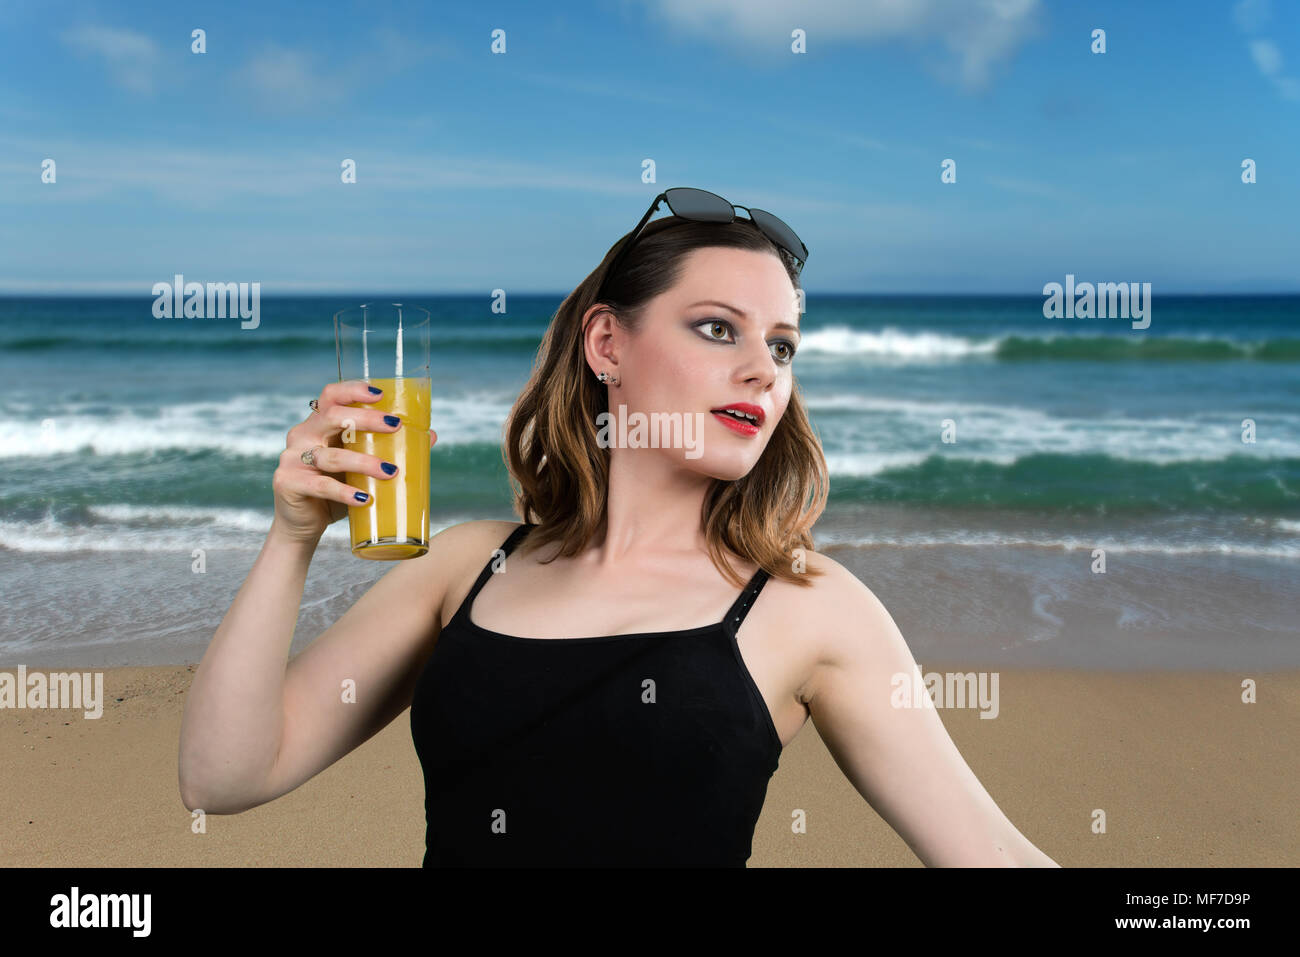 Drinking Orange Juice on the Beach. Attractive young women with a glass of orange juice posing on the beach. Stock Photo